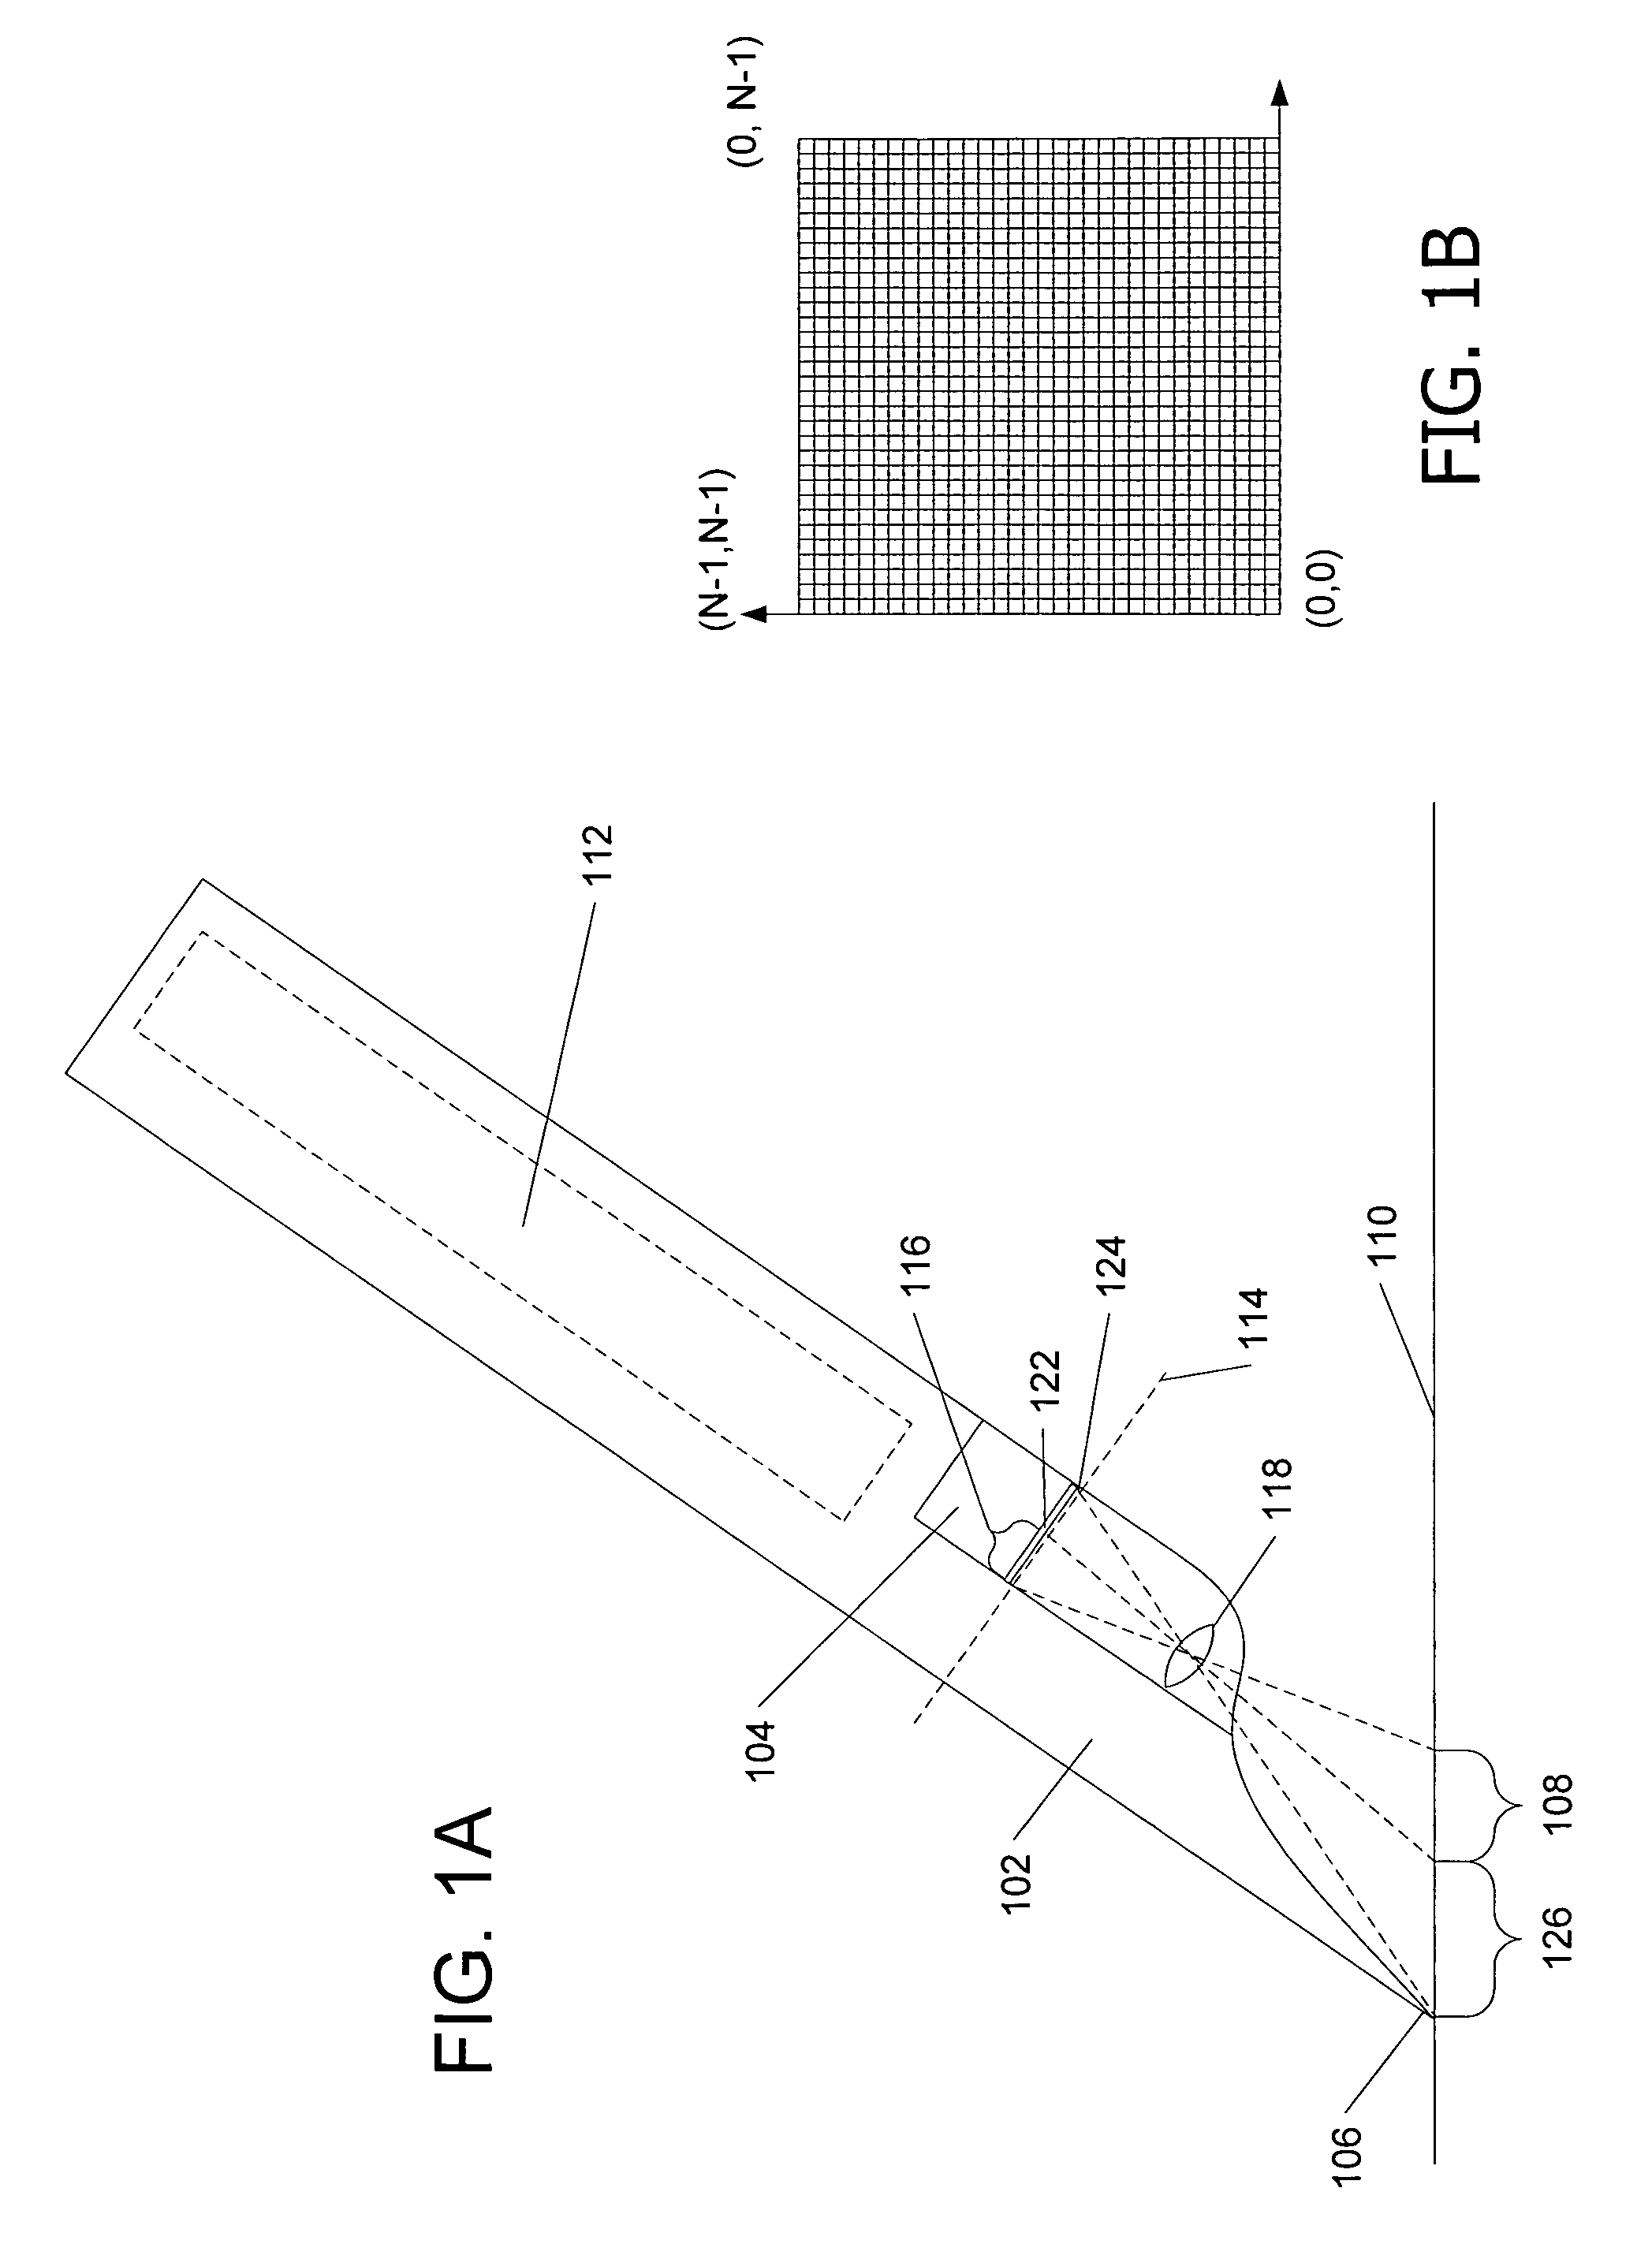 Coded pattern for an optical device and a prepared surface